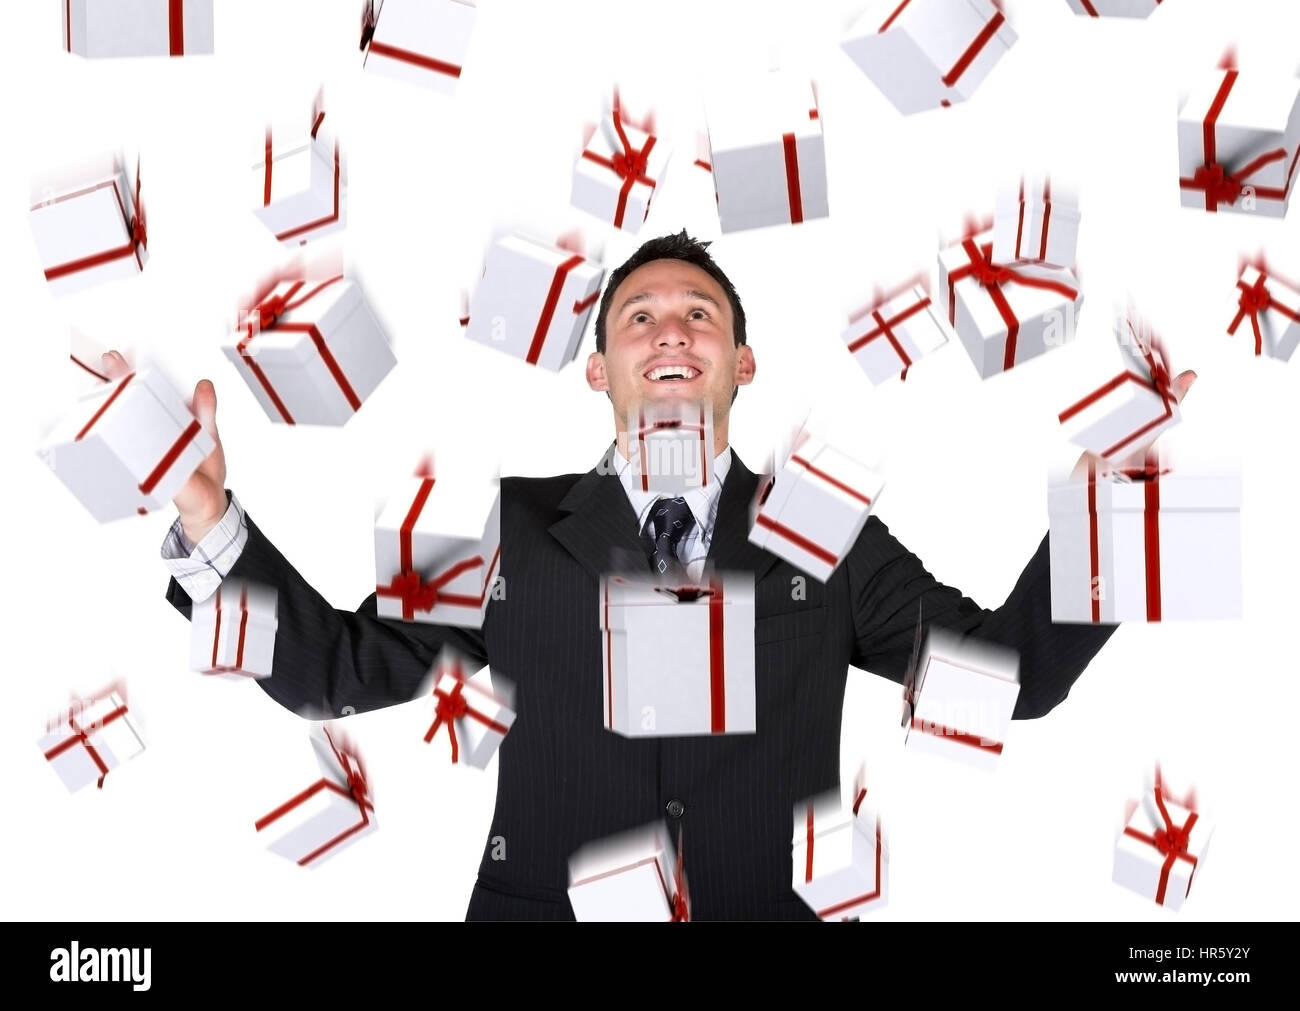 gifts falling down on a business man over a white background Stock Photo